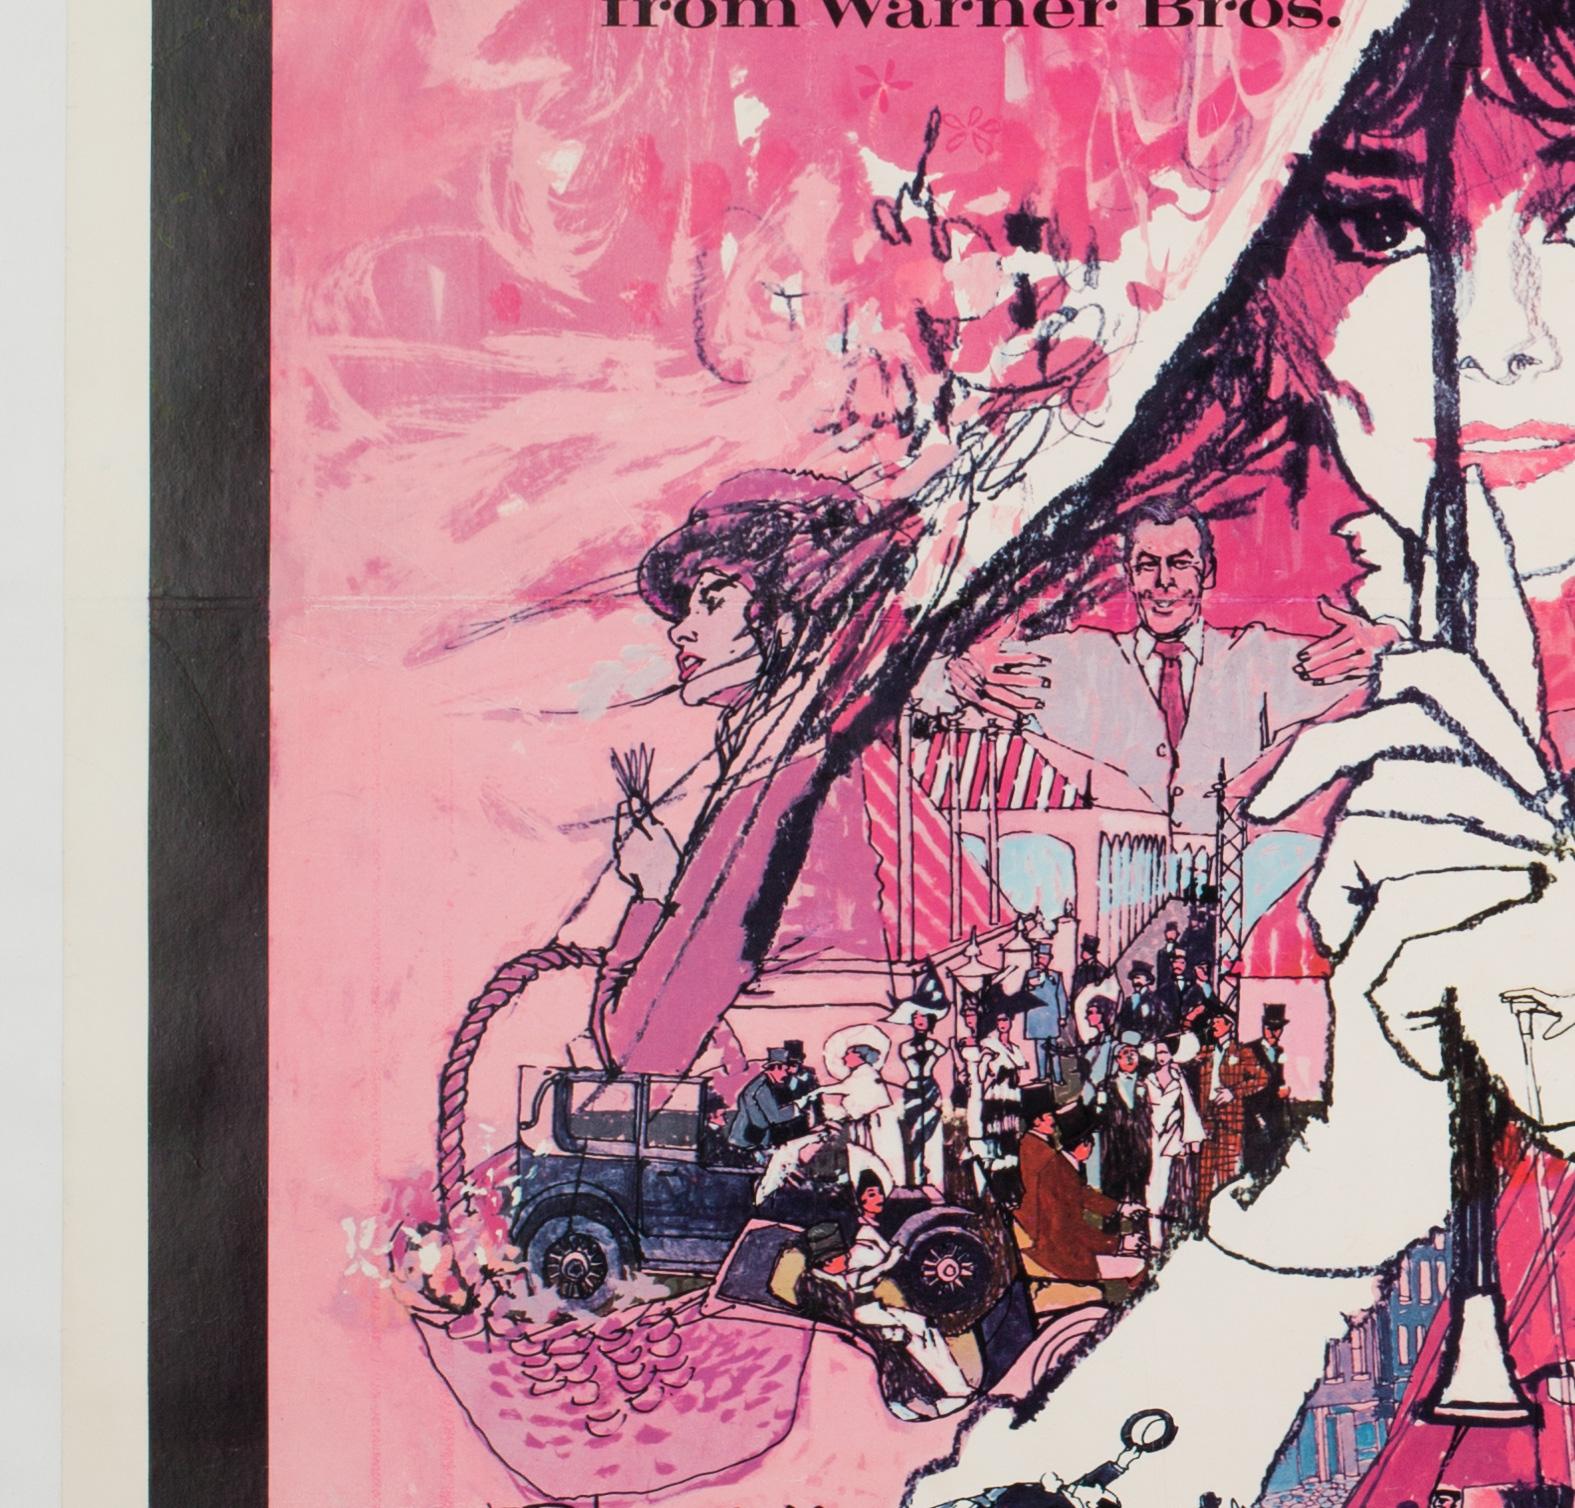 my fair lady 1964 poster